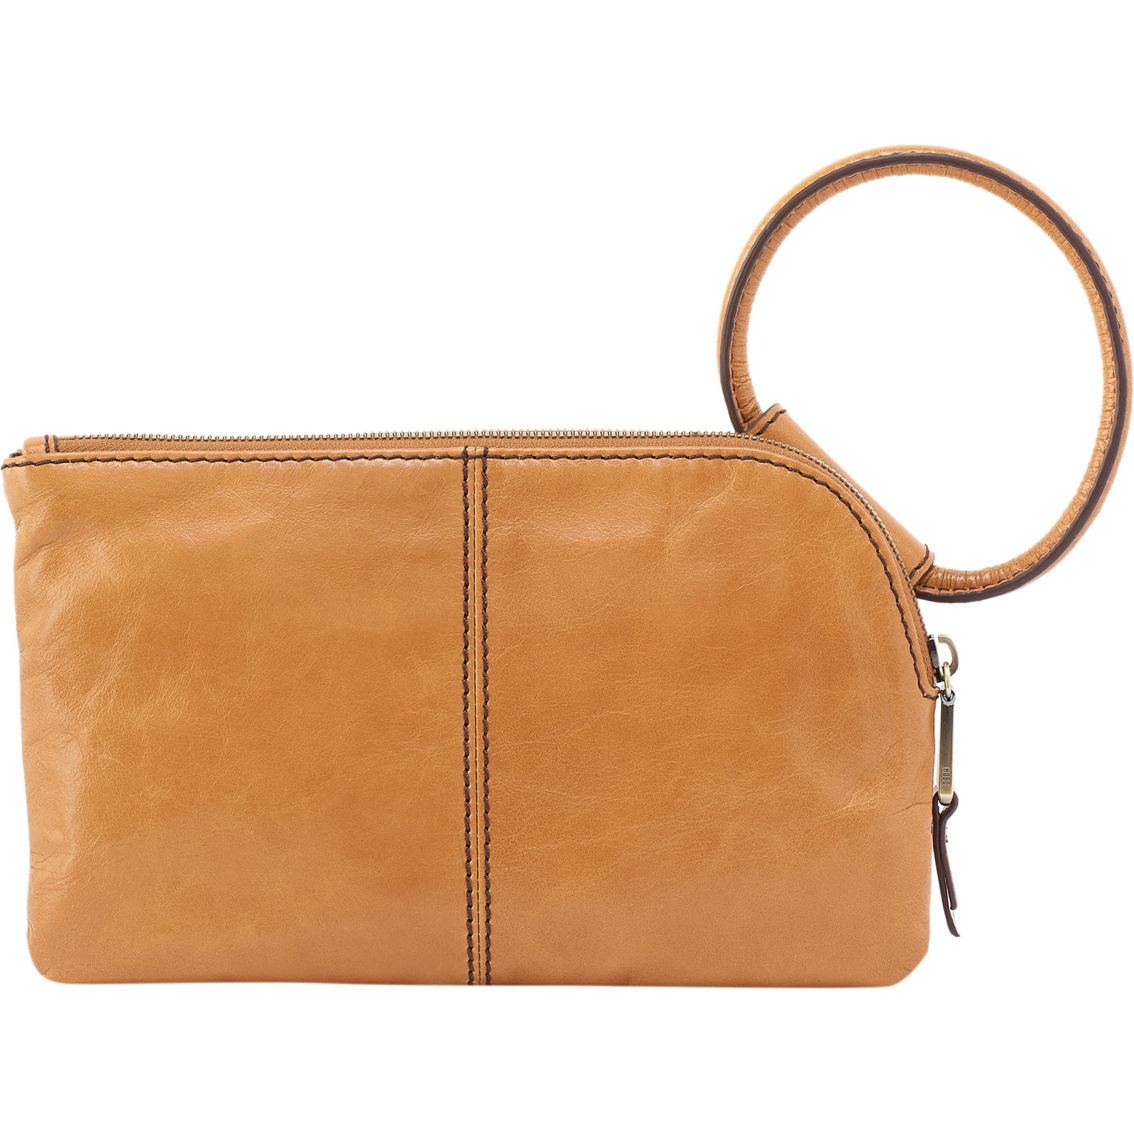 HOBO Sable Natural Clutch - Image 2 of 3